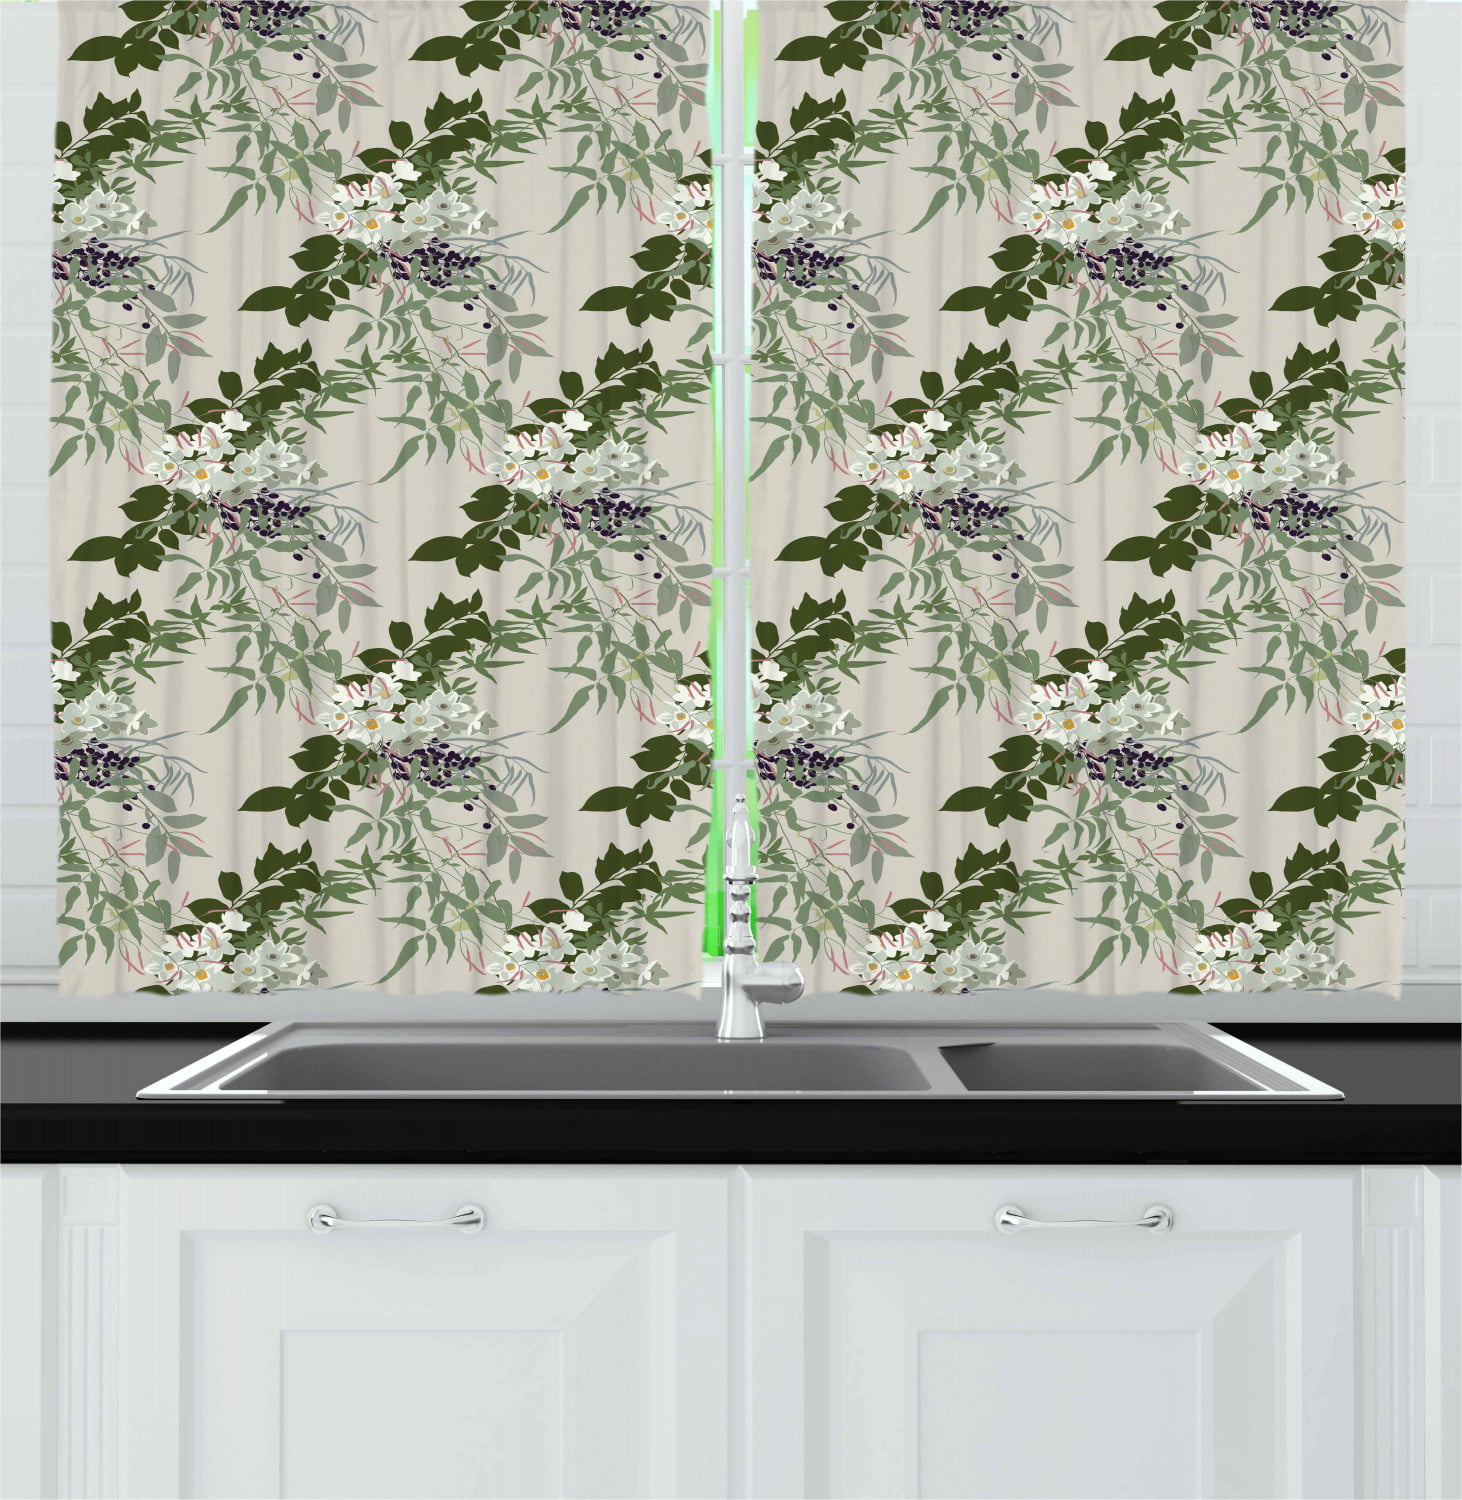 Cactus and Flower on Black Kitchen Curtain Window Drapes 2 Panel Set 55"x39" 